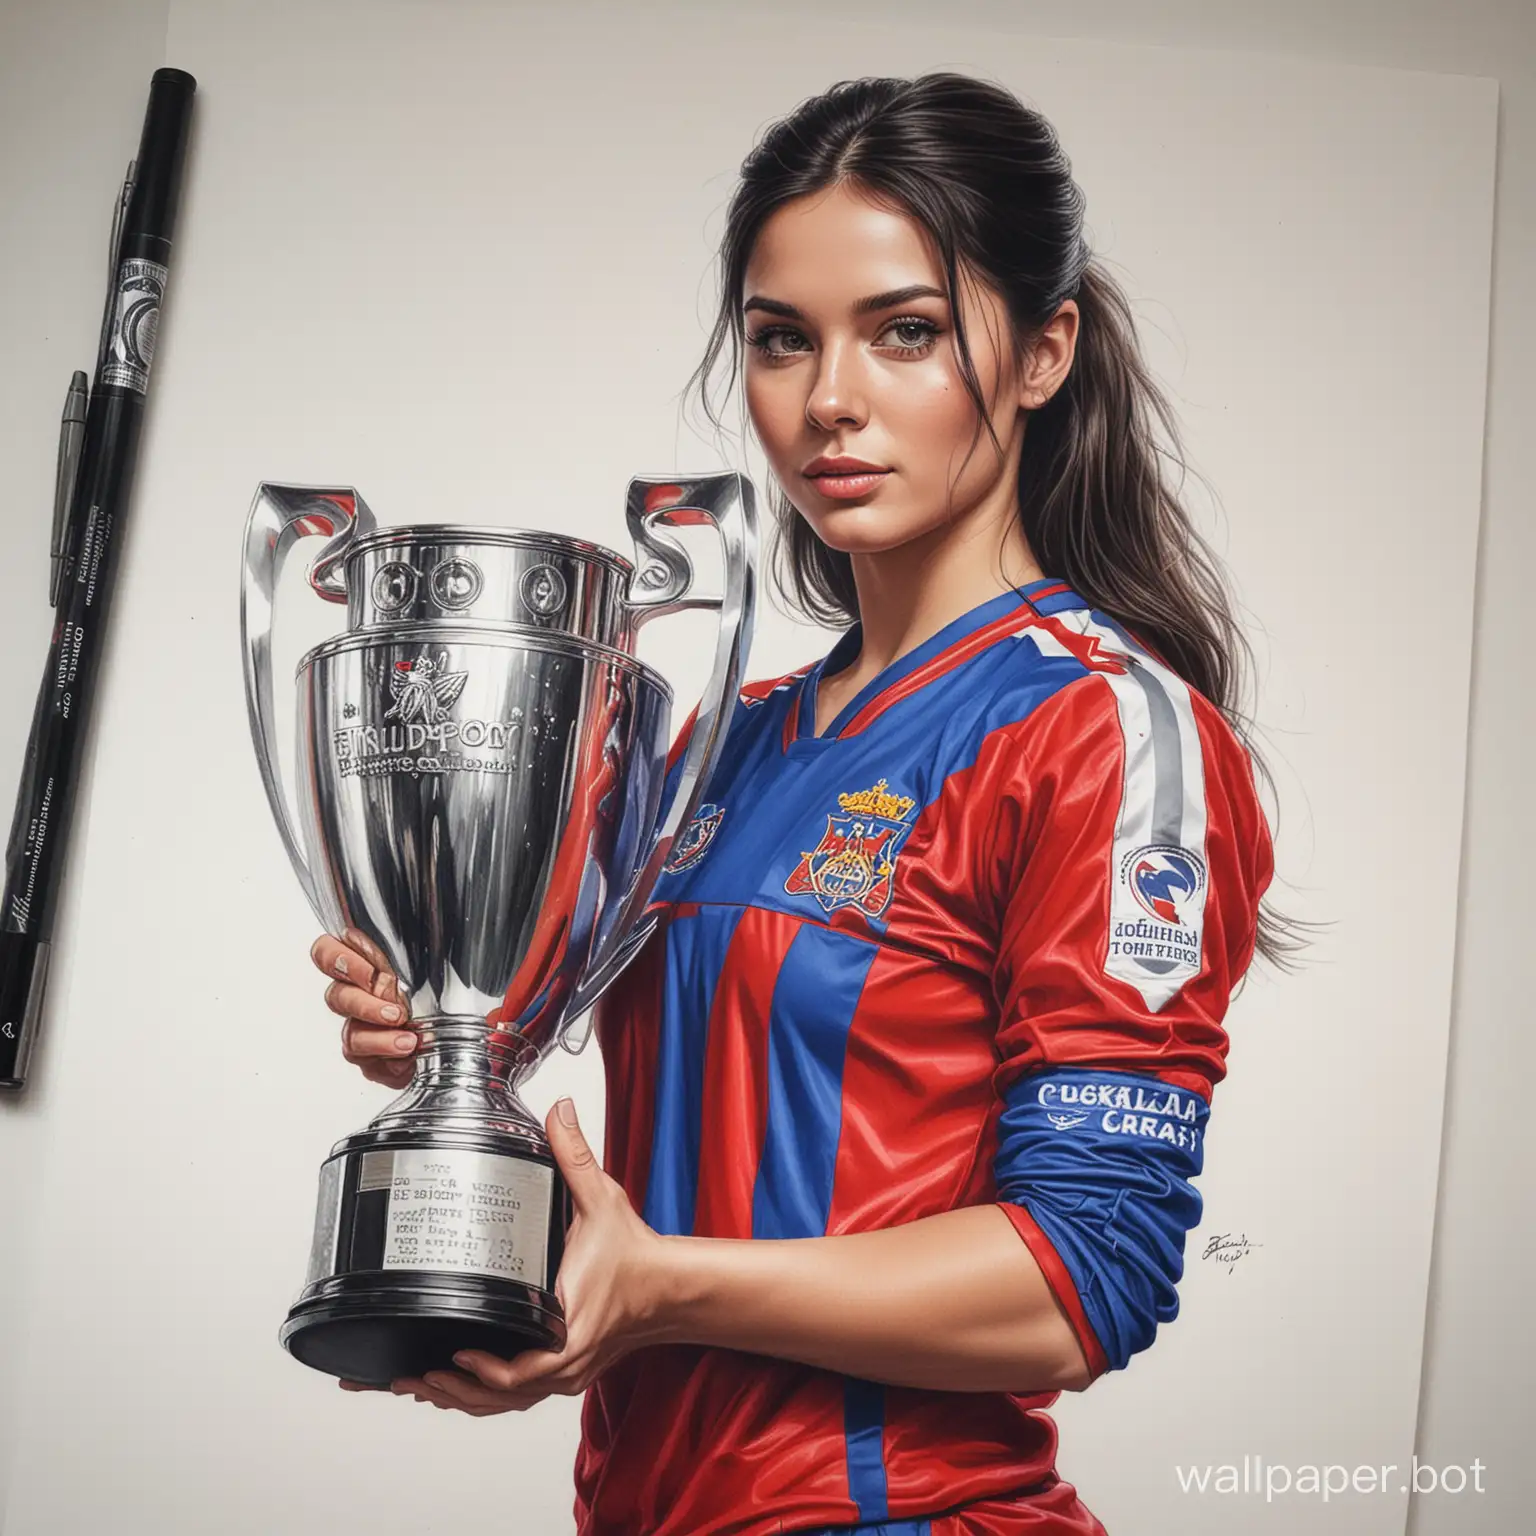 sketch young Elena MacArthur 26 years old dark hair 4 cup size narrow waist in CSKA football uniform holding a large trophy champions white background high realism drawing with colored marker sexy